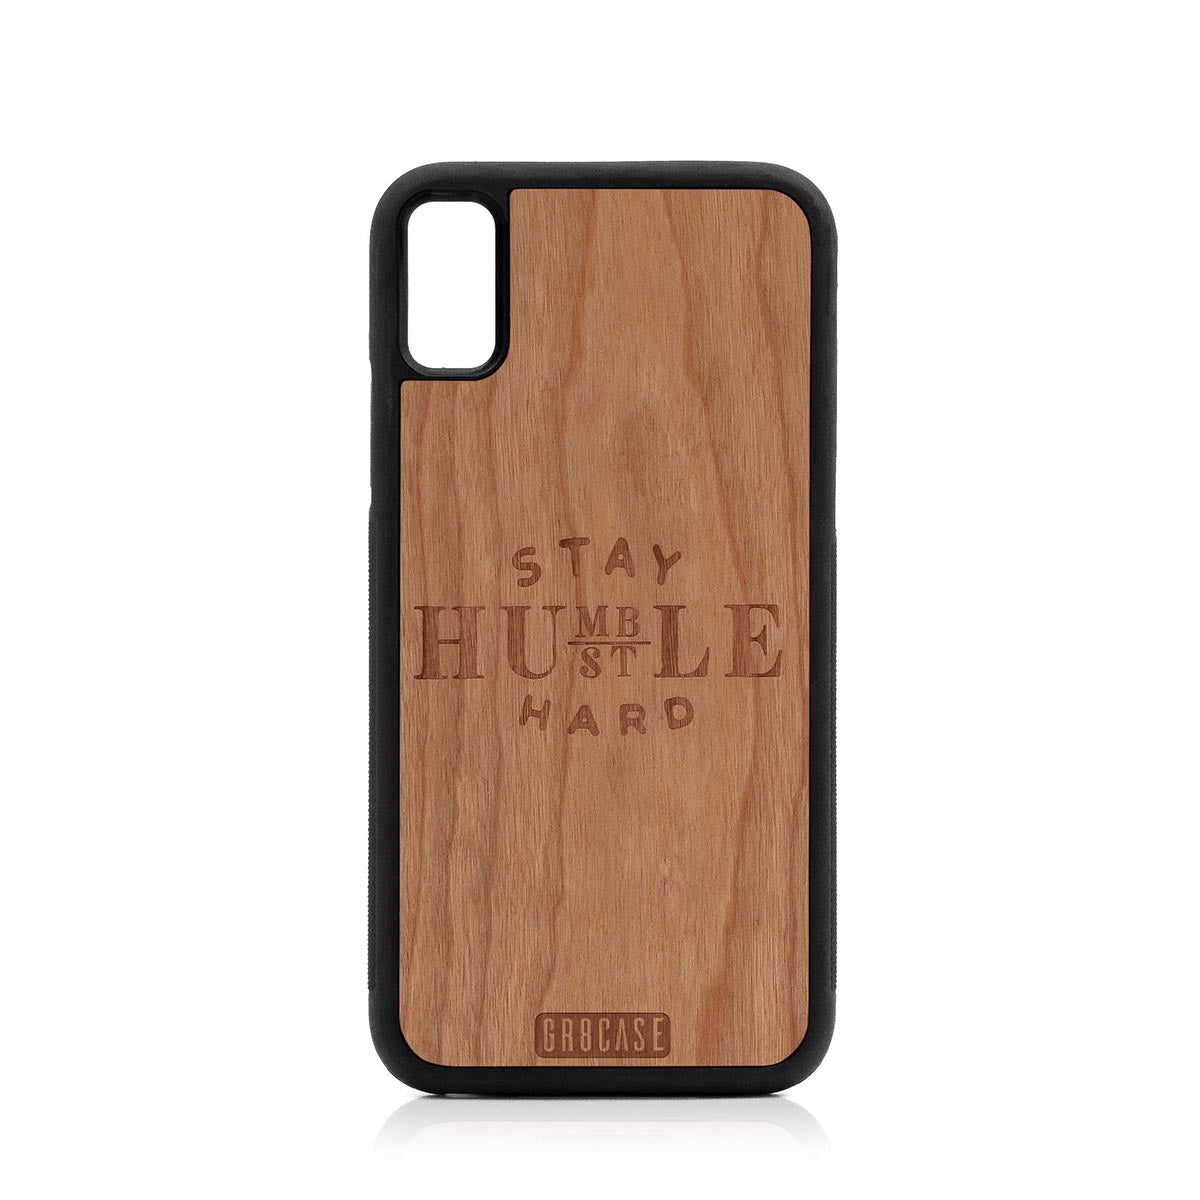 Stay Humble Hustle Hard Design Wood Case For iPhone X/XS by GR8CASE